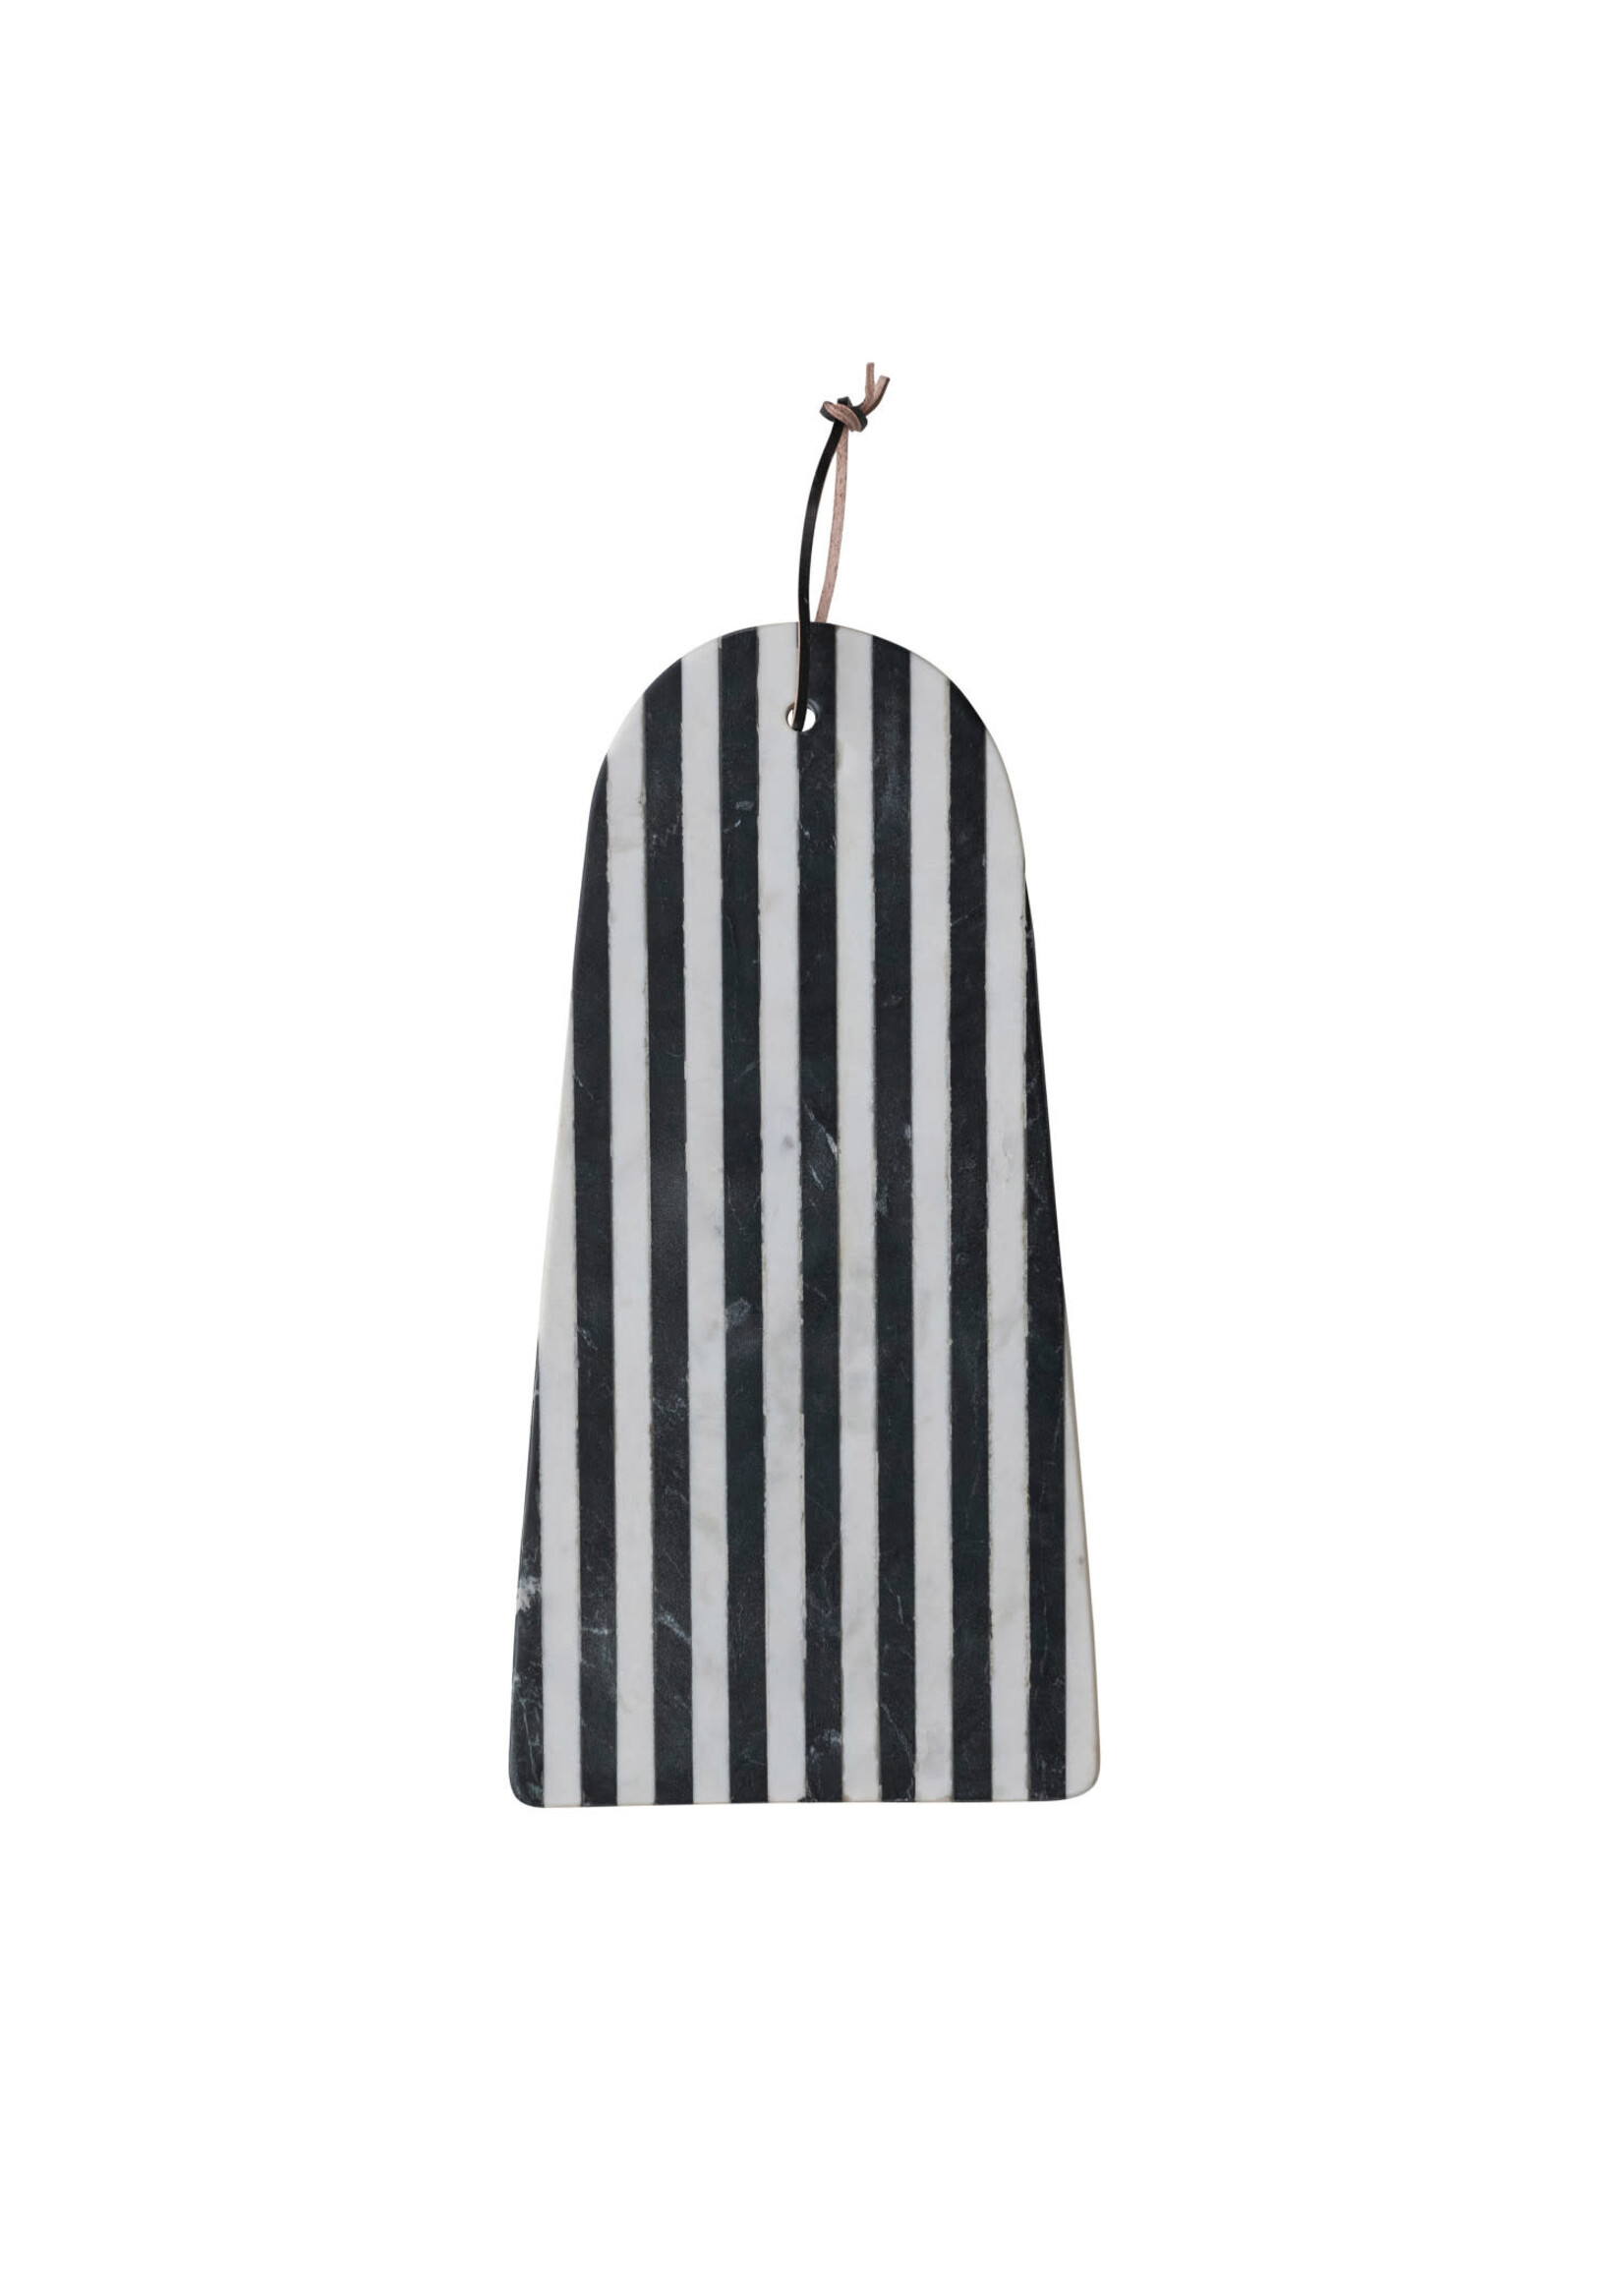 Marble Cheese/Cutting Board w/ Stripes & Leather Tie, Black & White